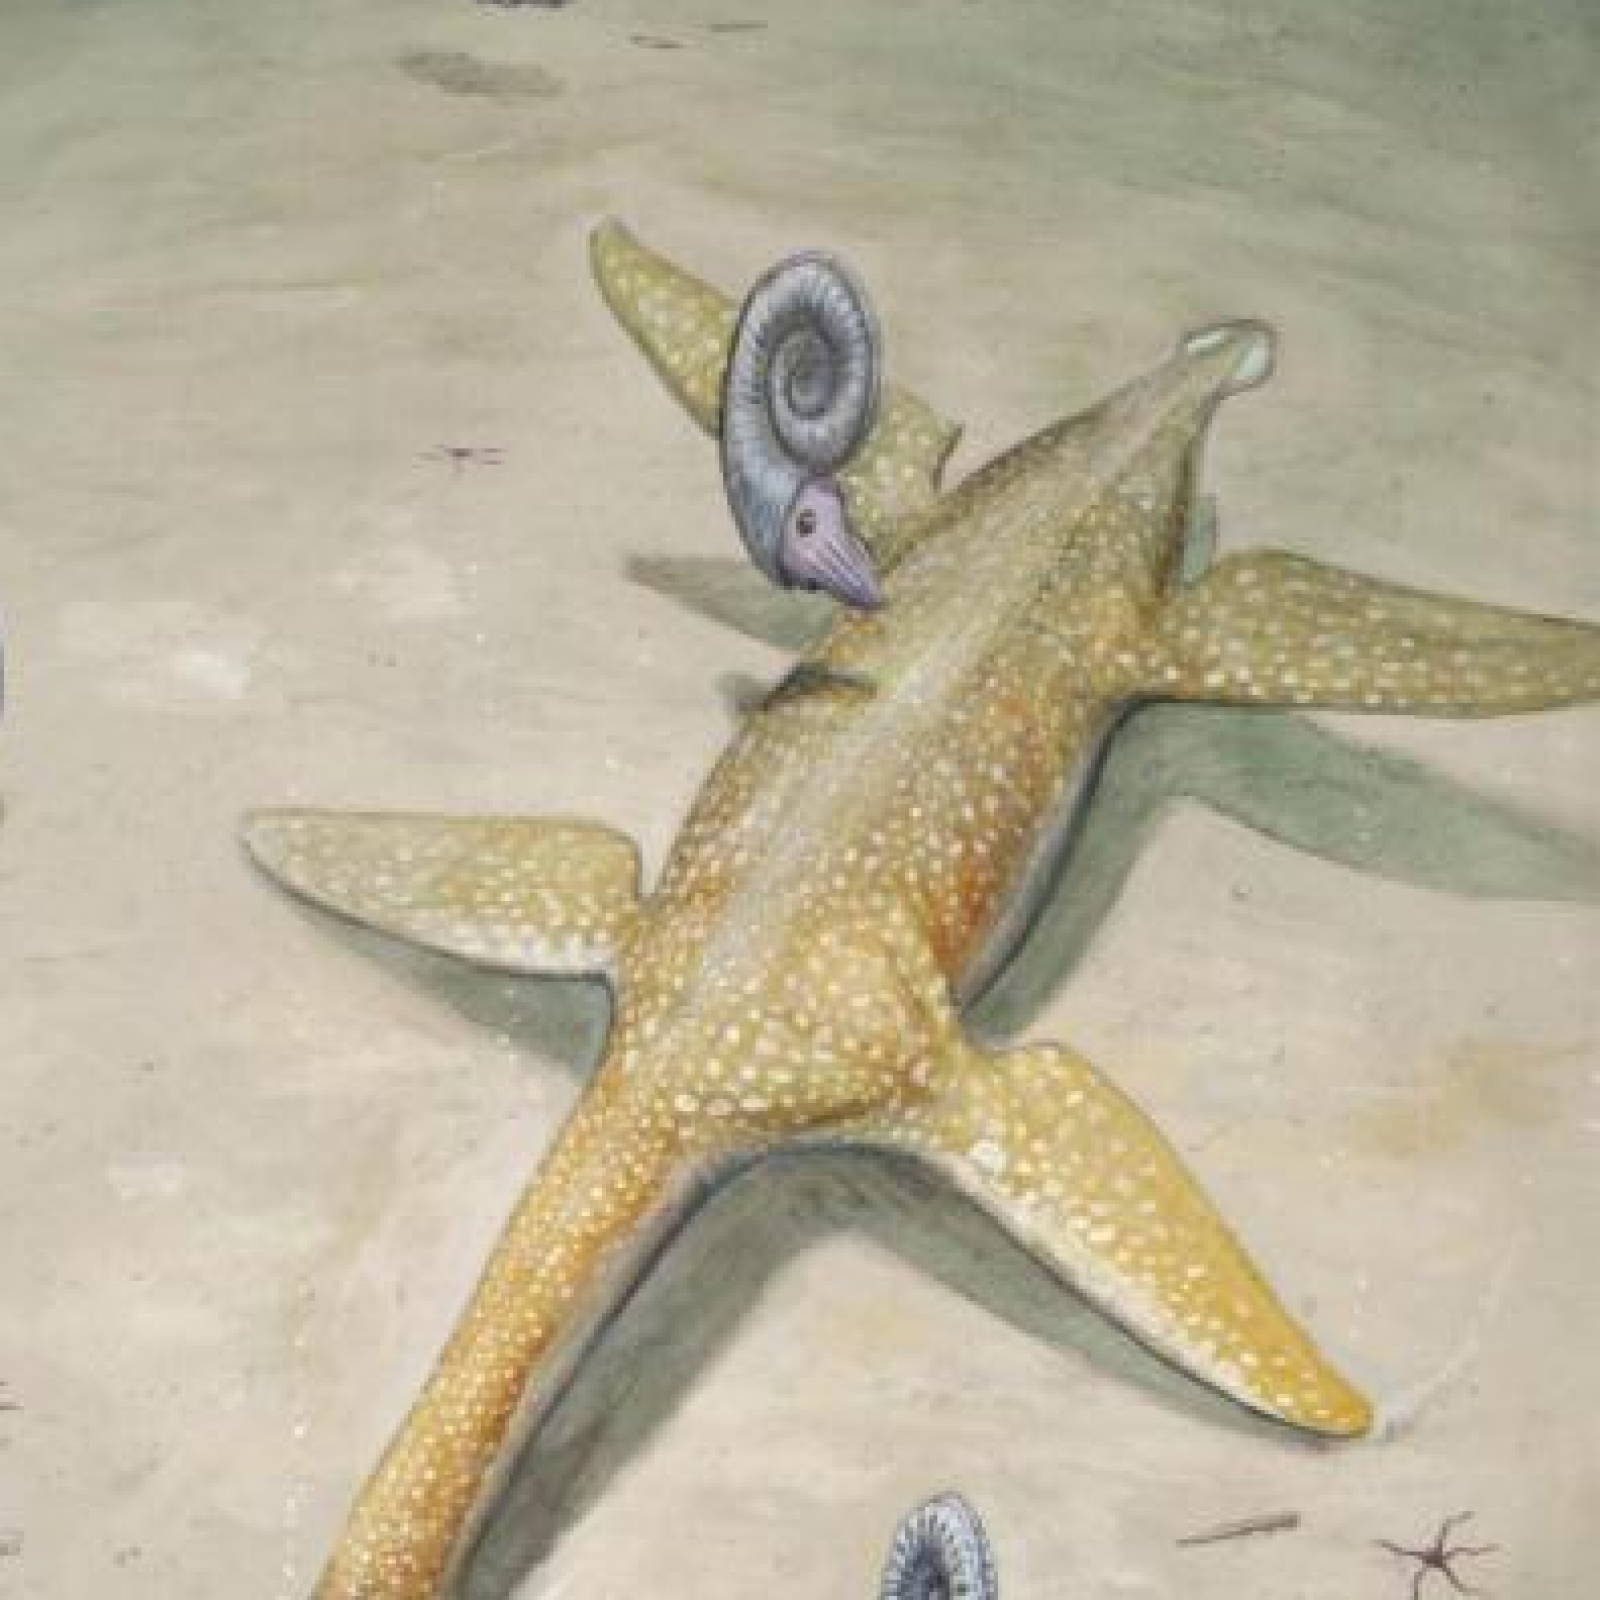 Arminisaurus Schuberti: Ancient Bizarre Sea Creature Found in Germany Among  'Most Complete' of its Kind